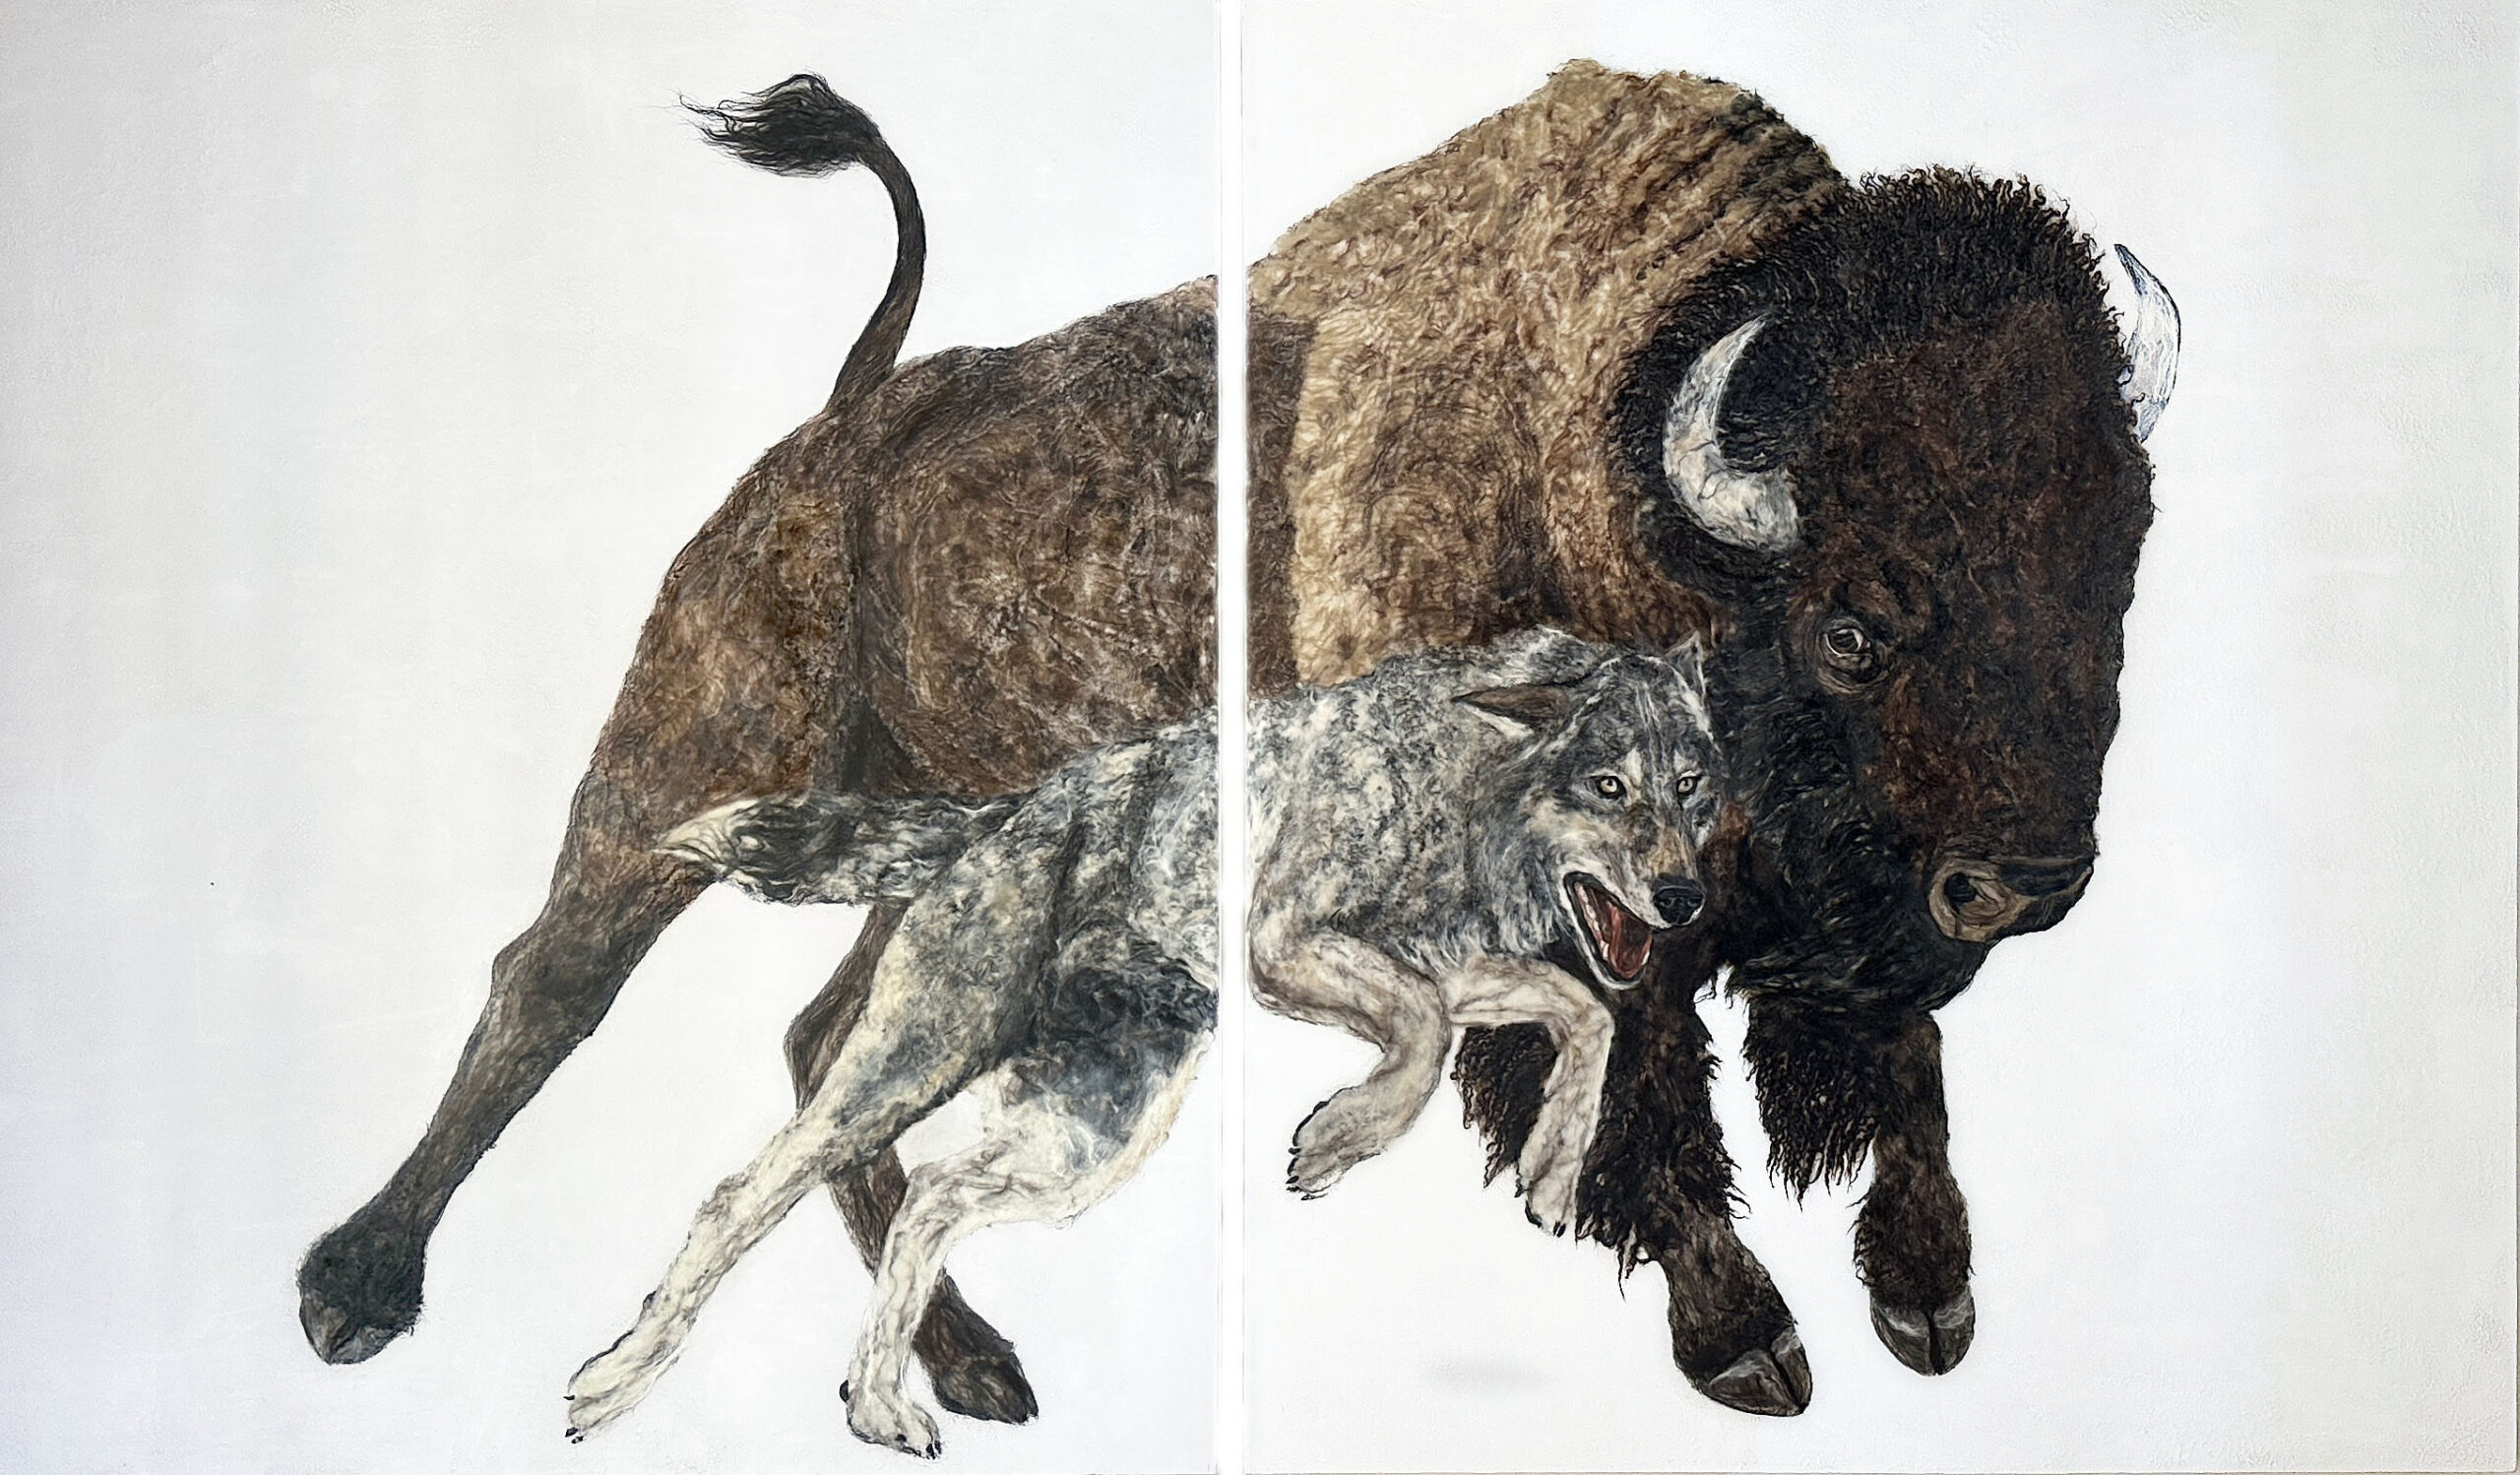 A painting of two animals fighting for the same territory.